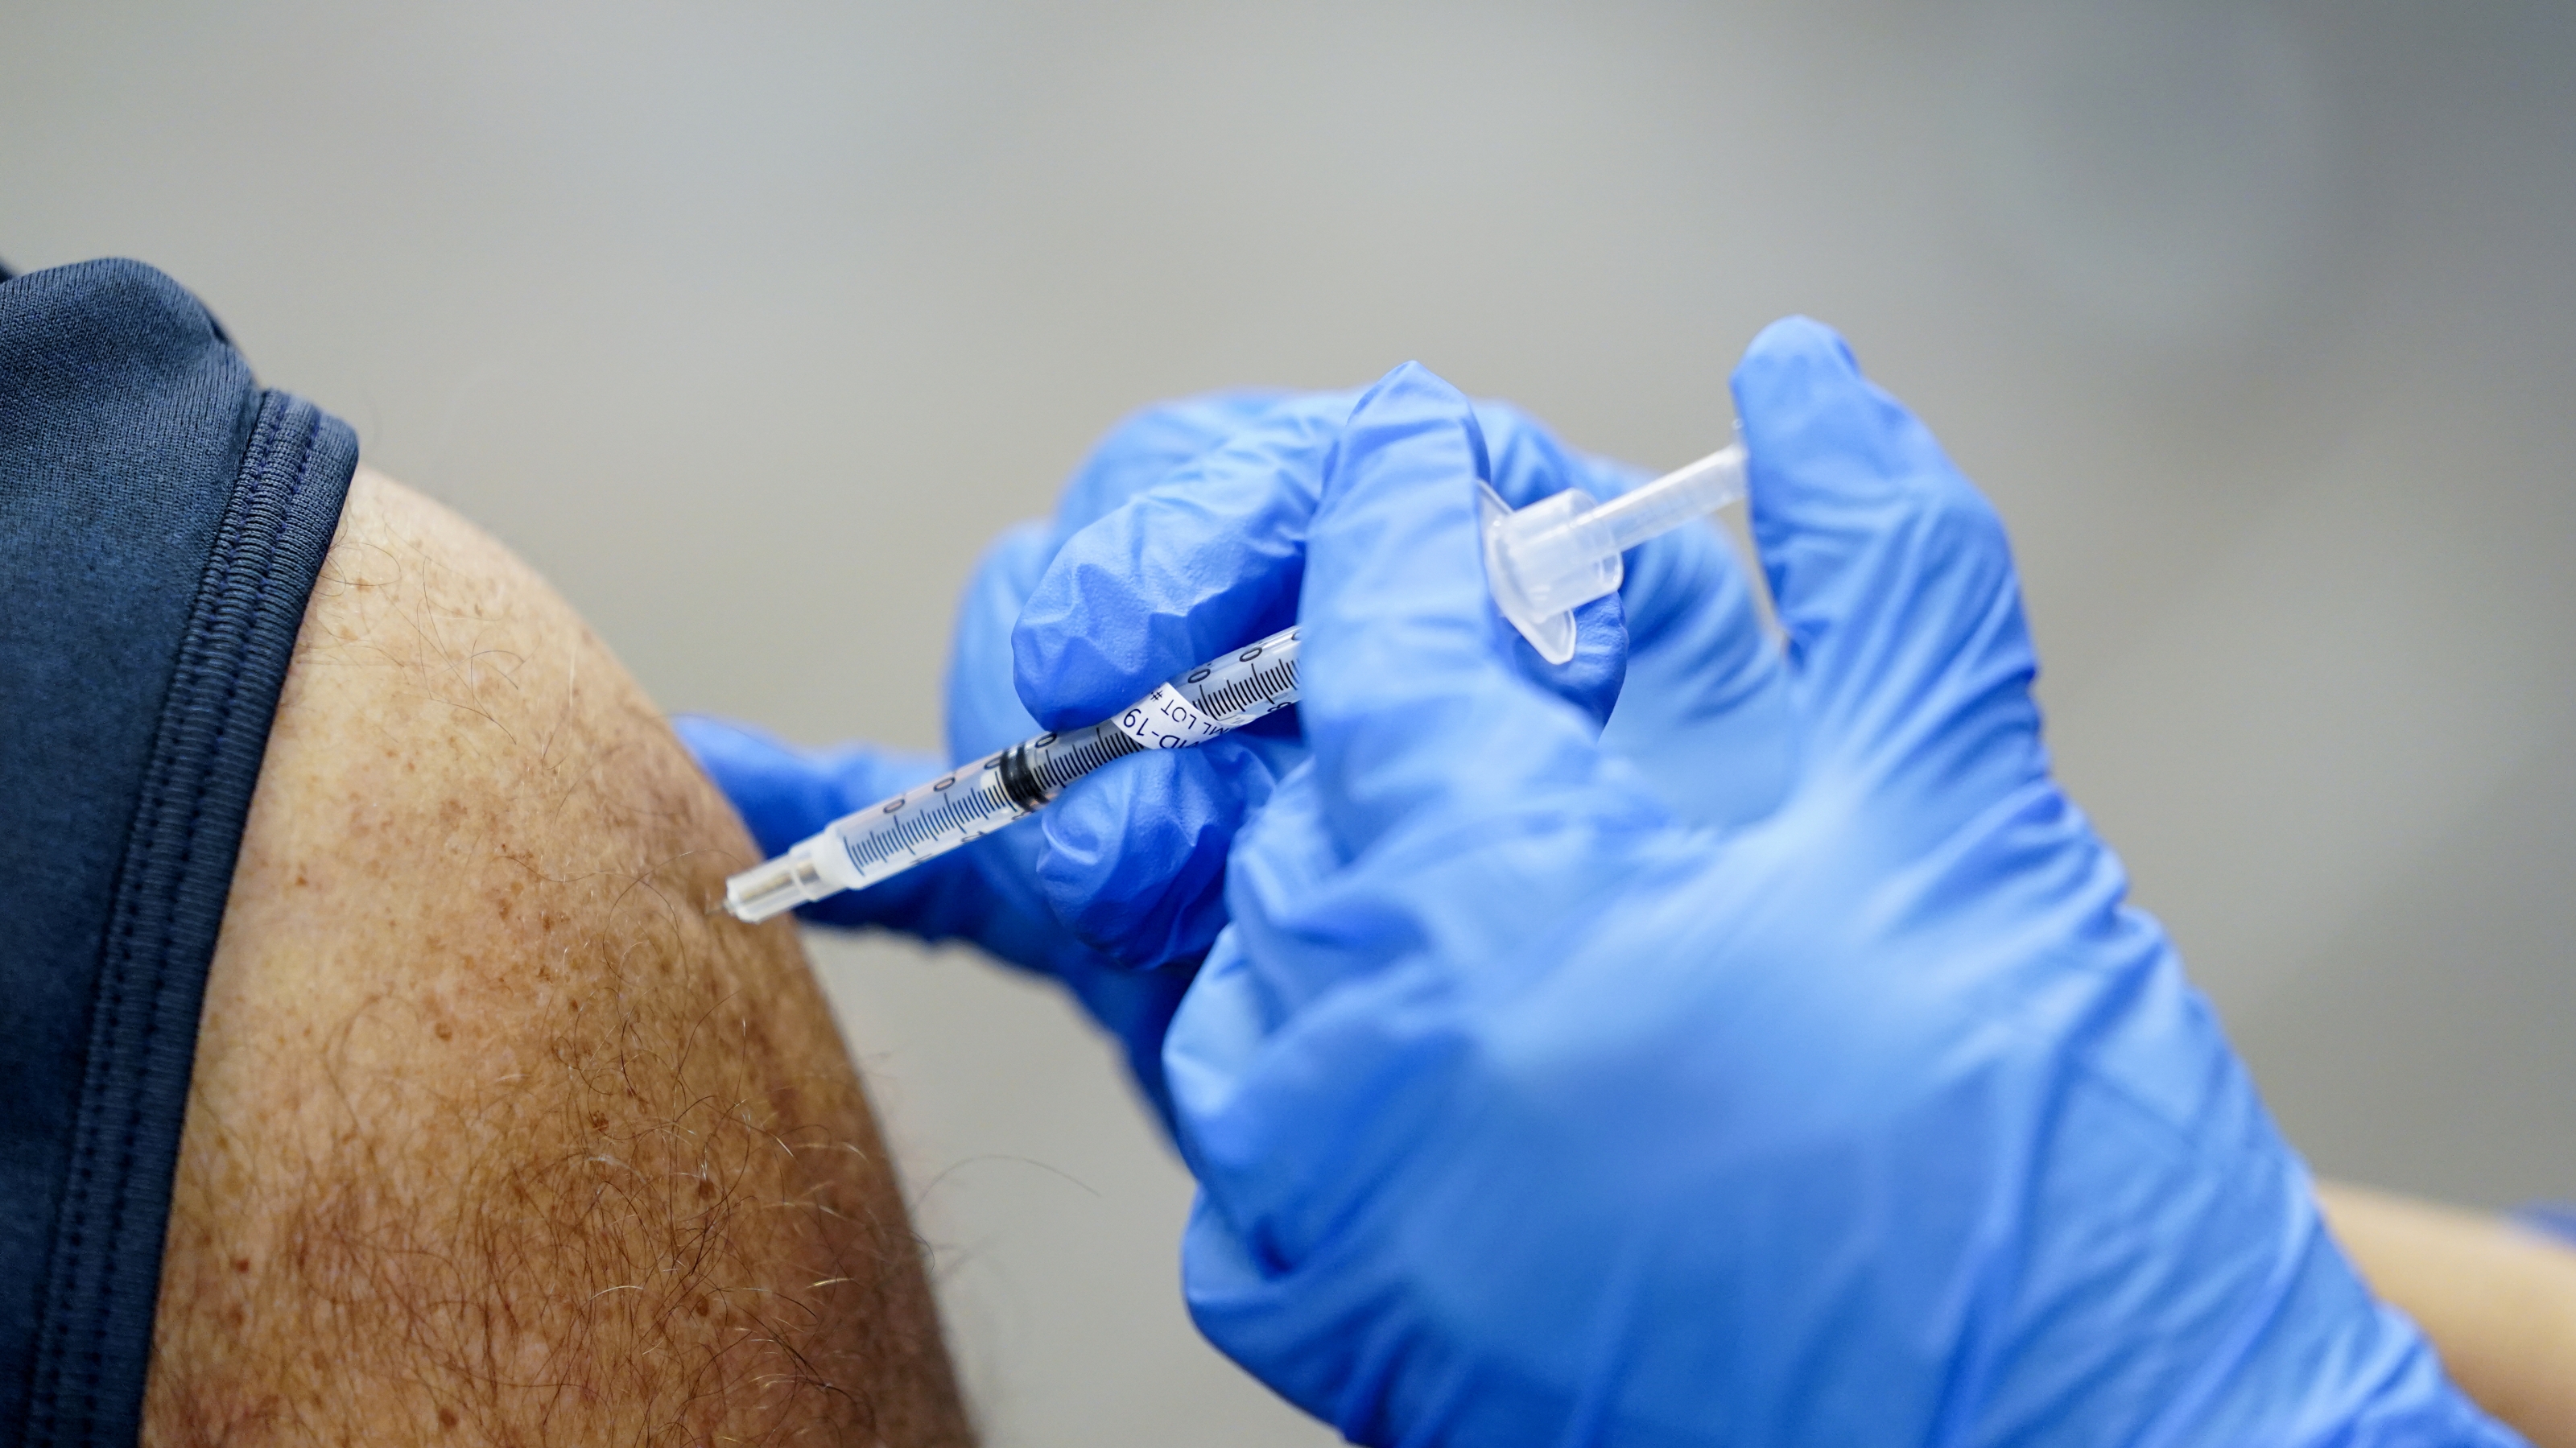 ‘Chaos and confusion’ at the vaccine launch raises the question: What is fair?